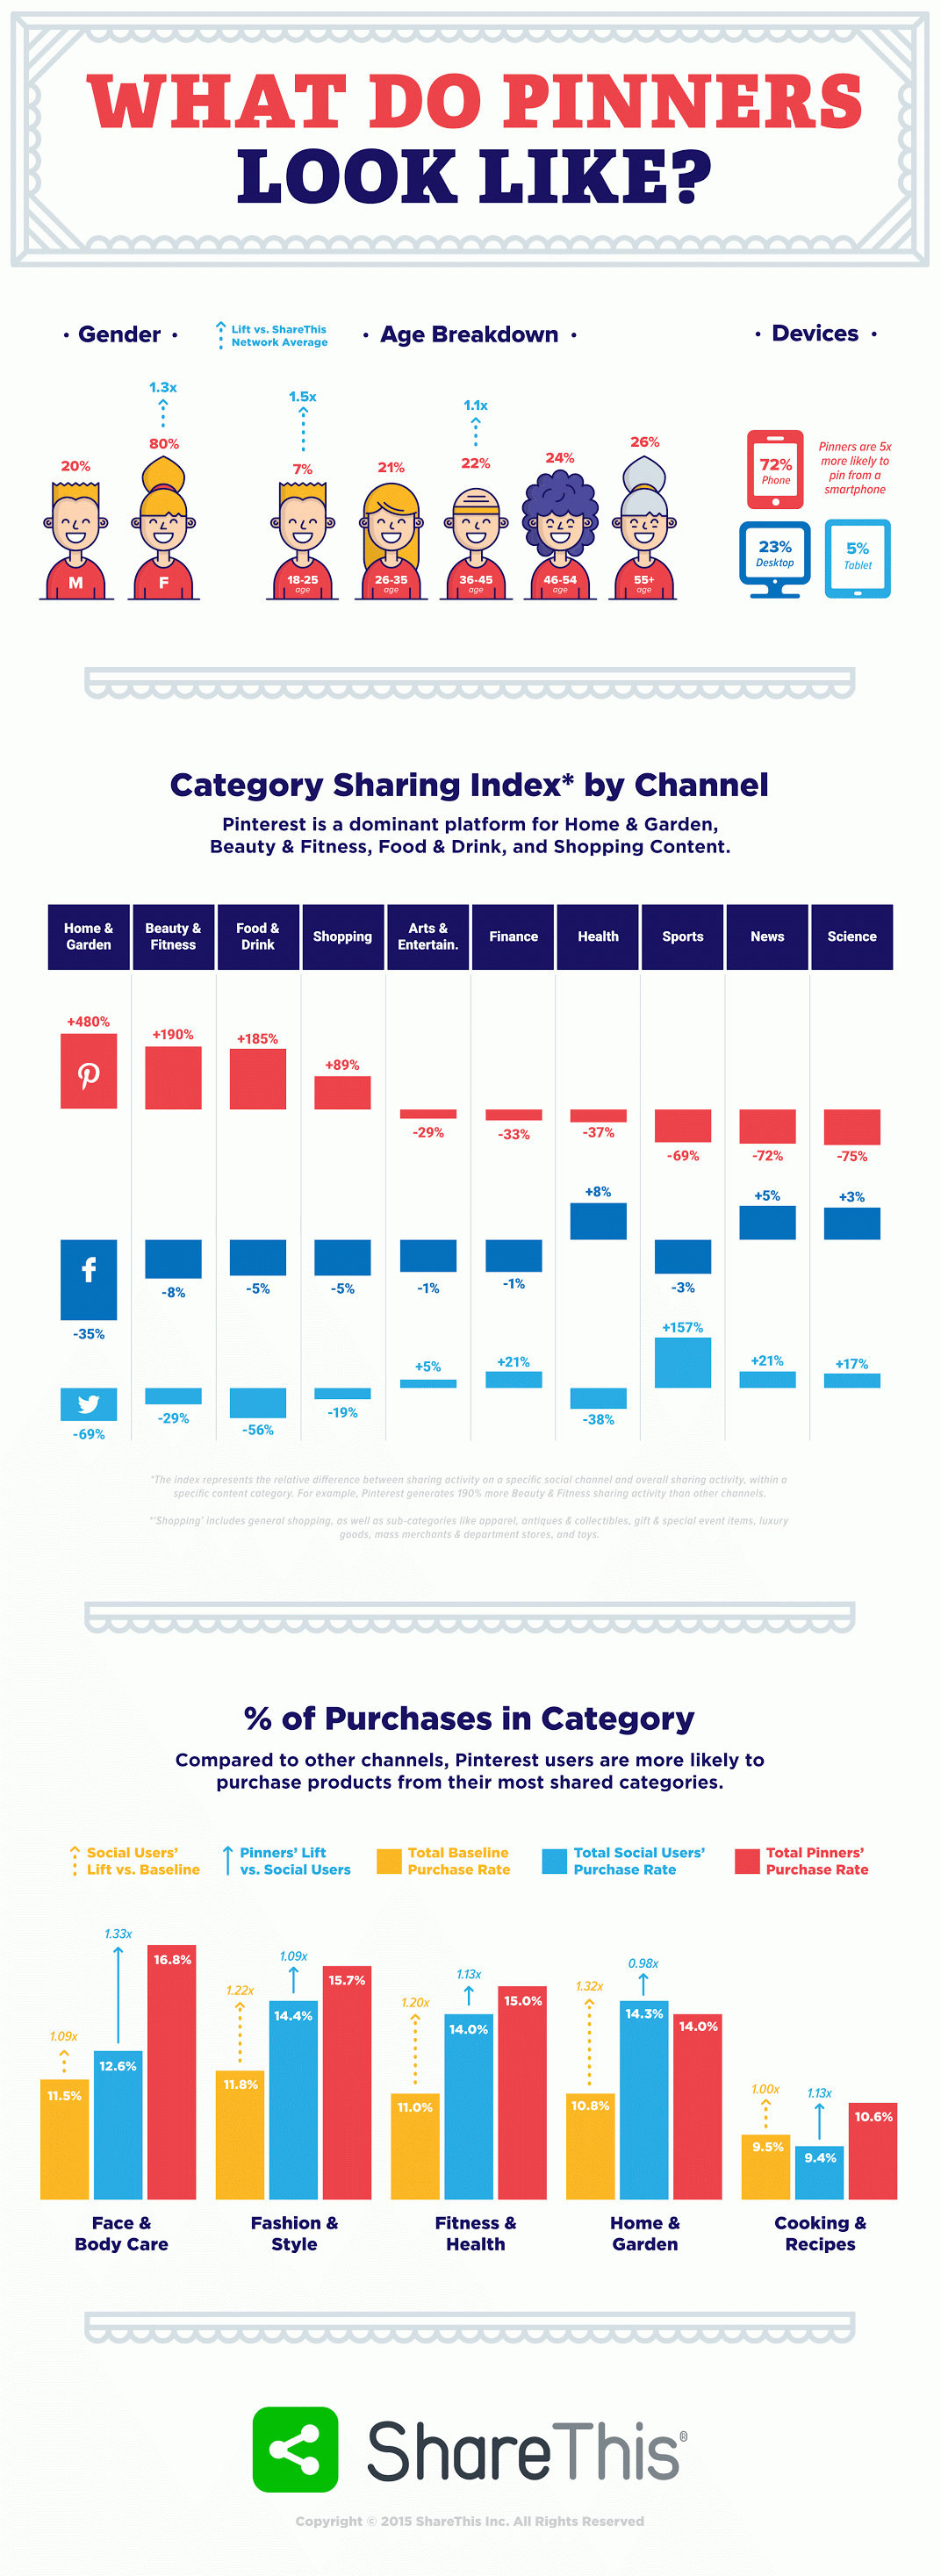 Pintent to Purchase - how much is a pin on #Pinterest worth to your brand?  - #Infographic #socialmedia